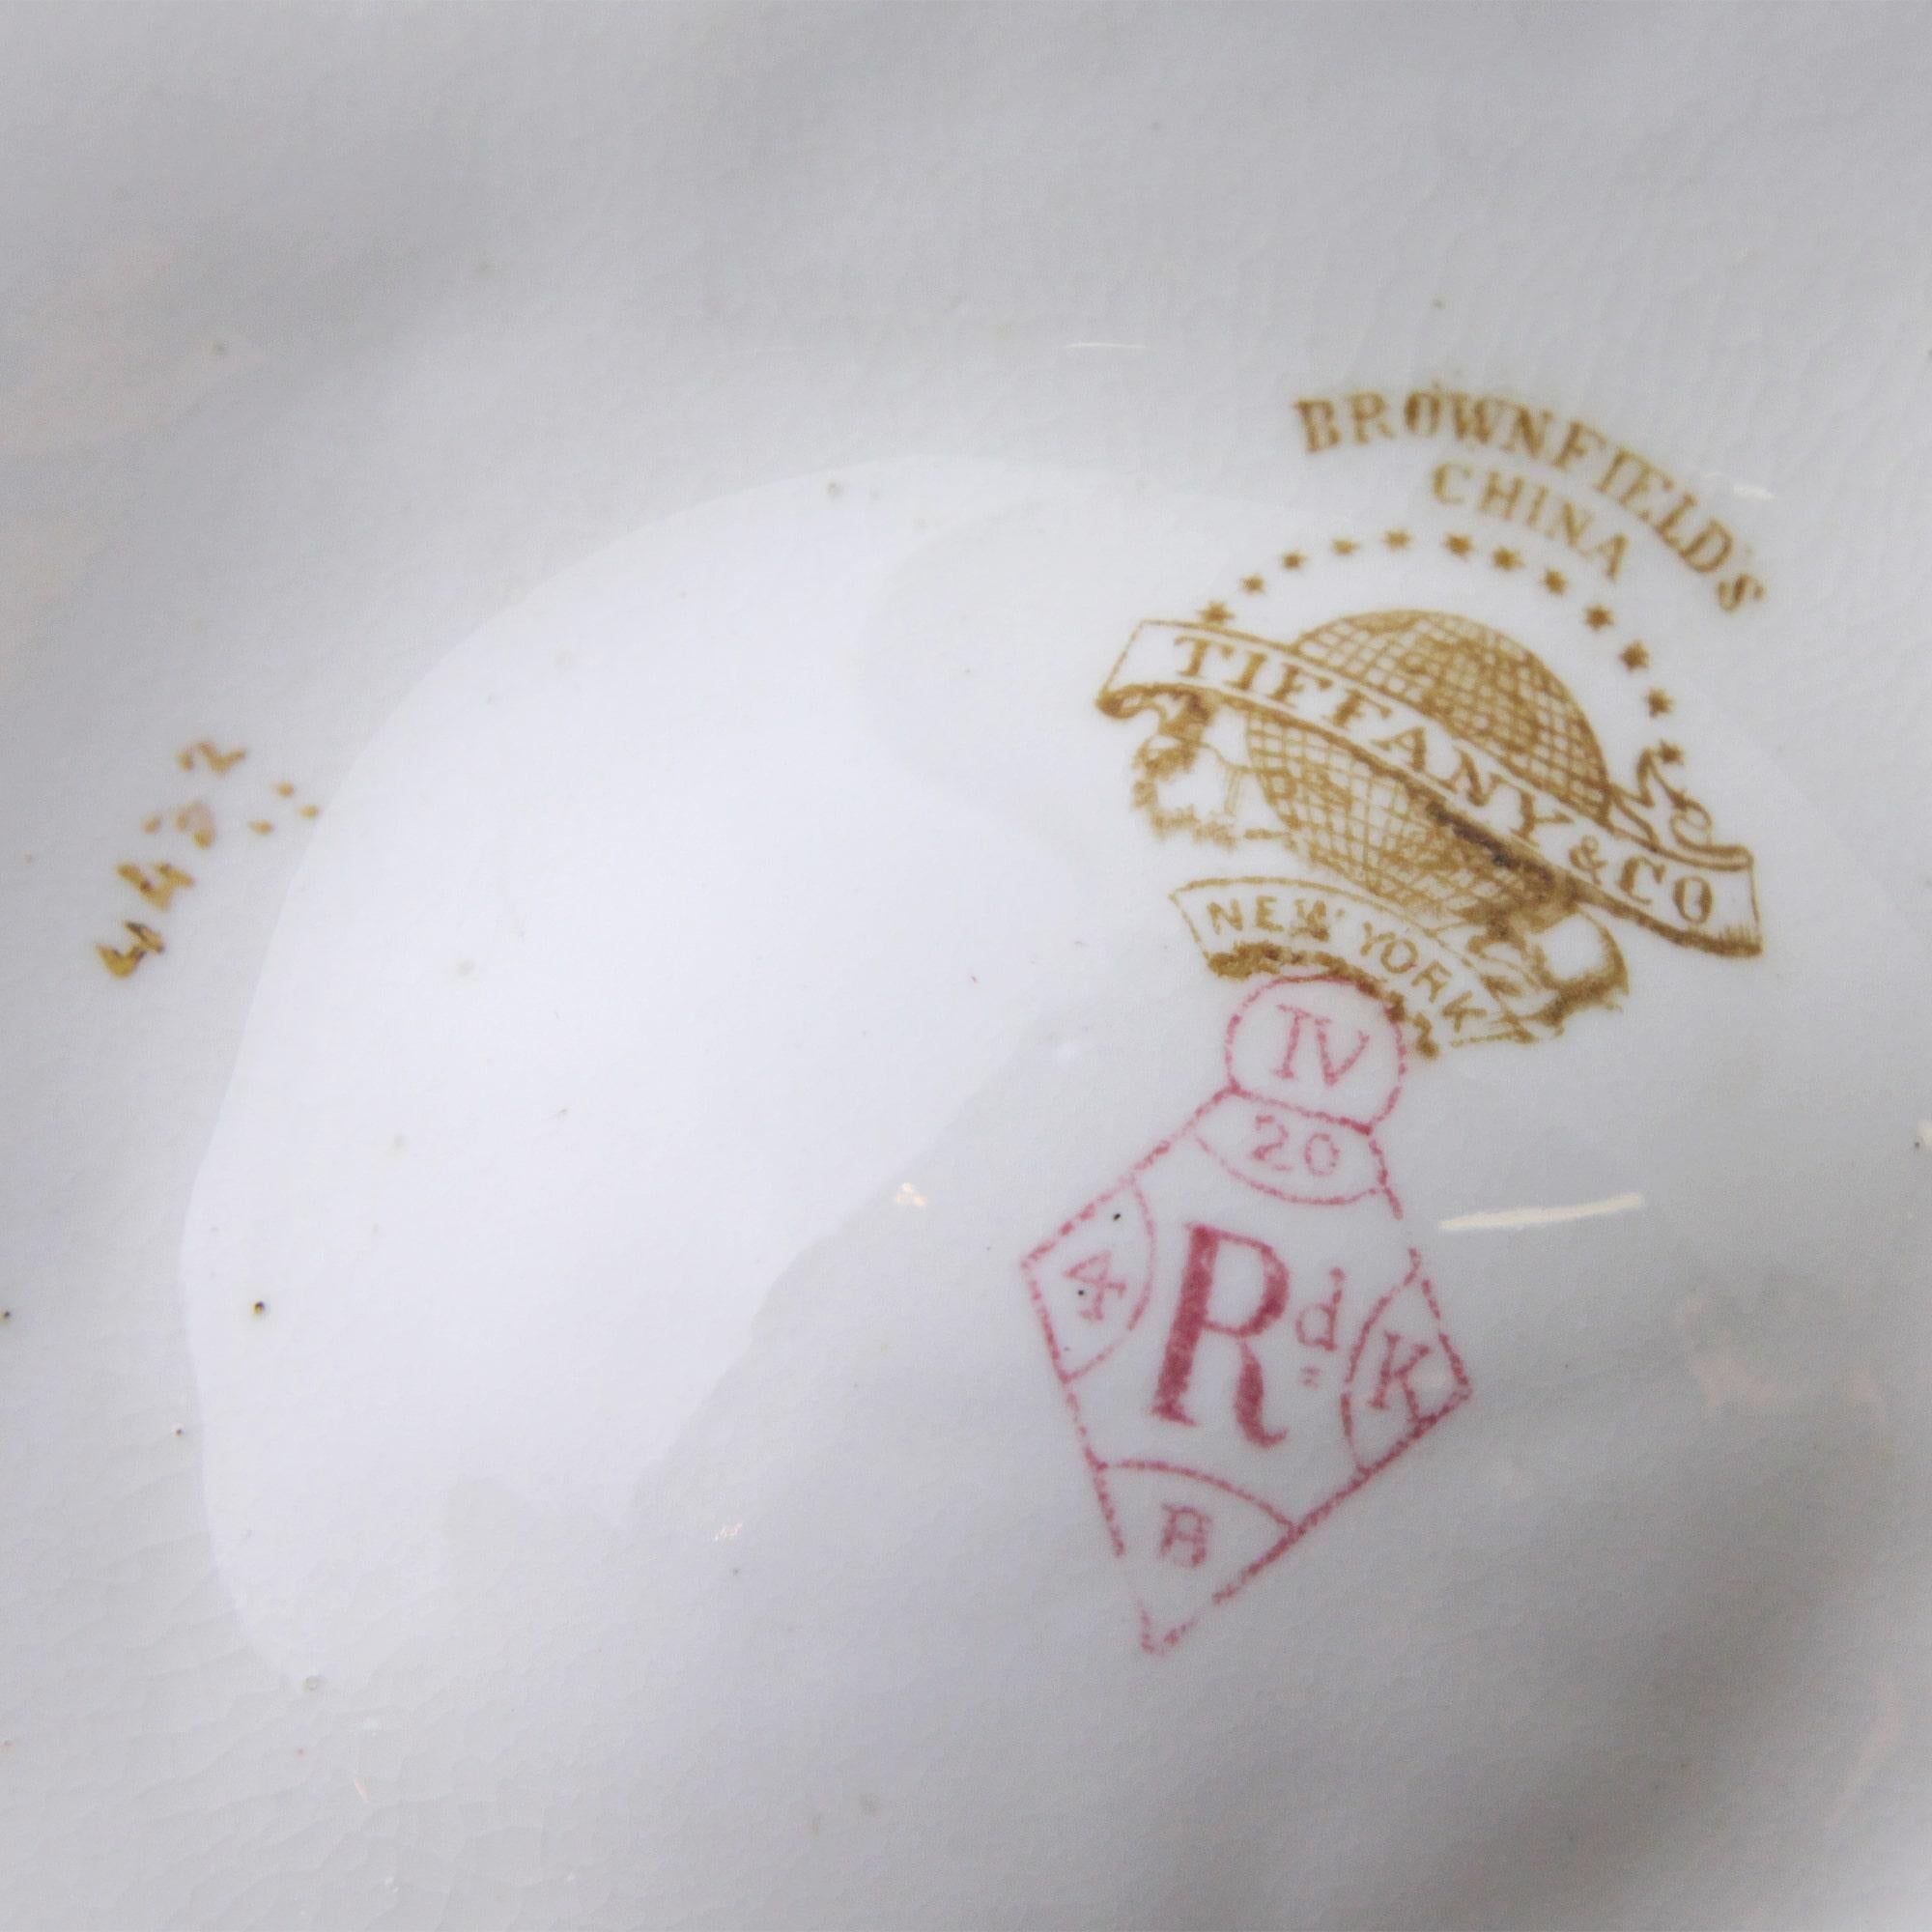 Brownfield's for Tiffany & Company Porcelain Oyster Plate In Good Condition For Sale In Brisbane, QLD